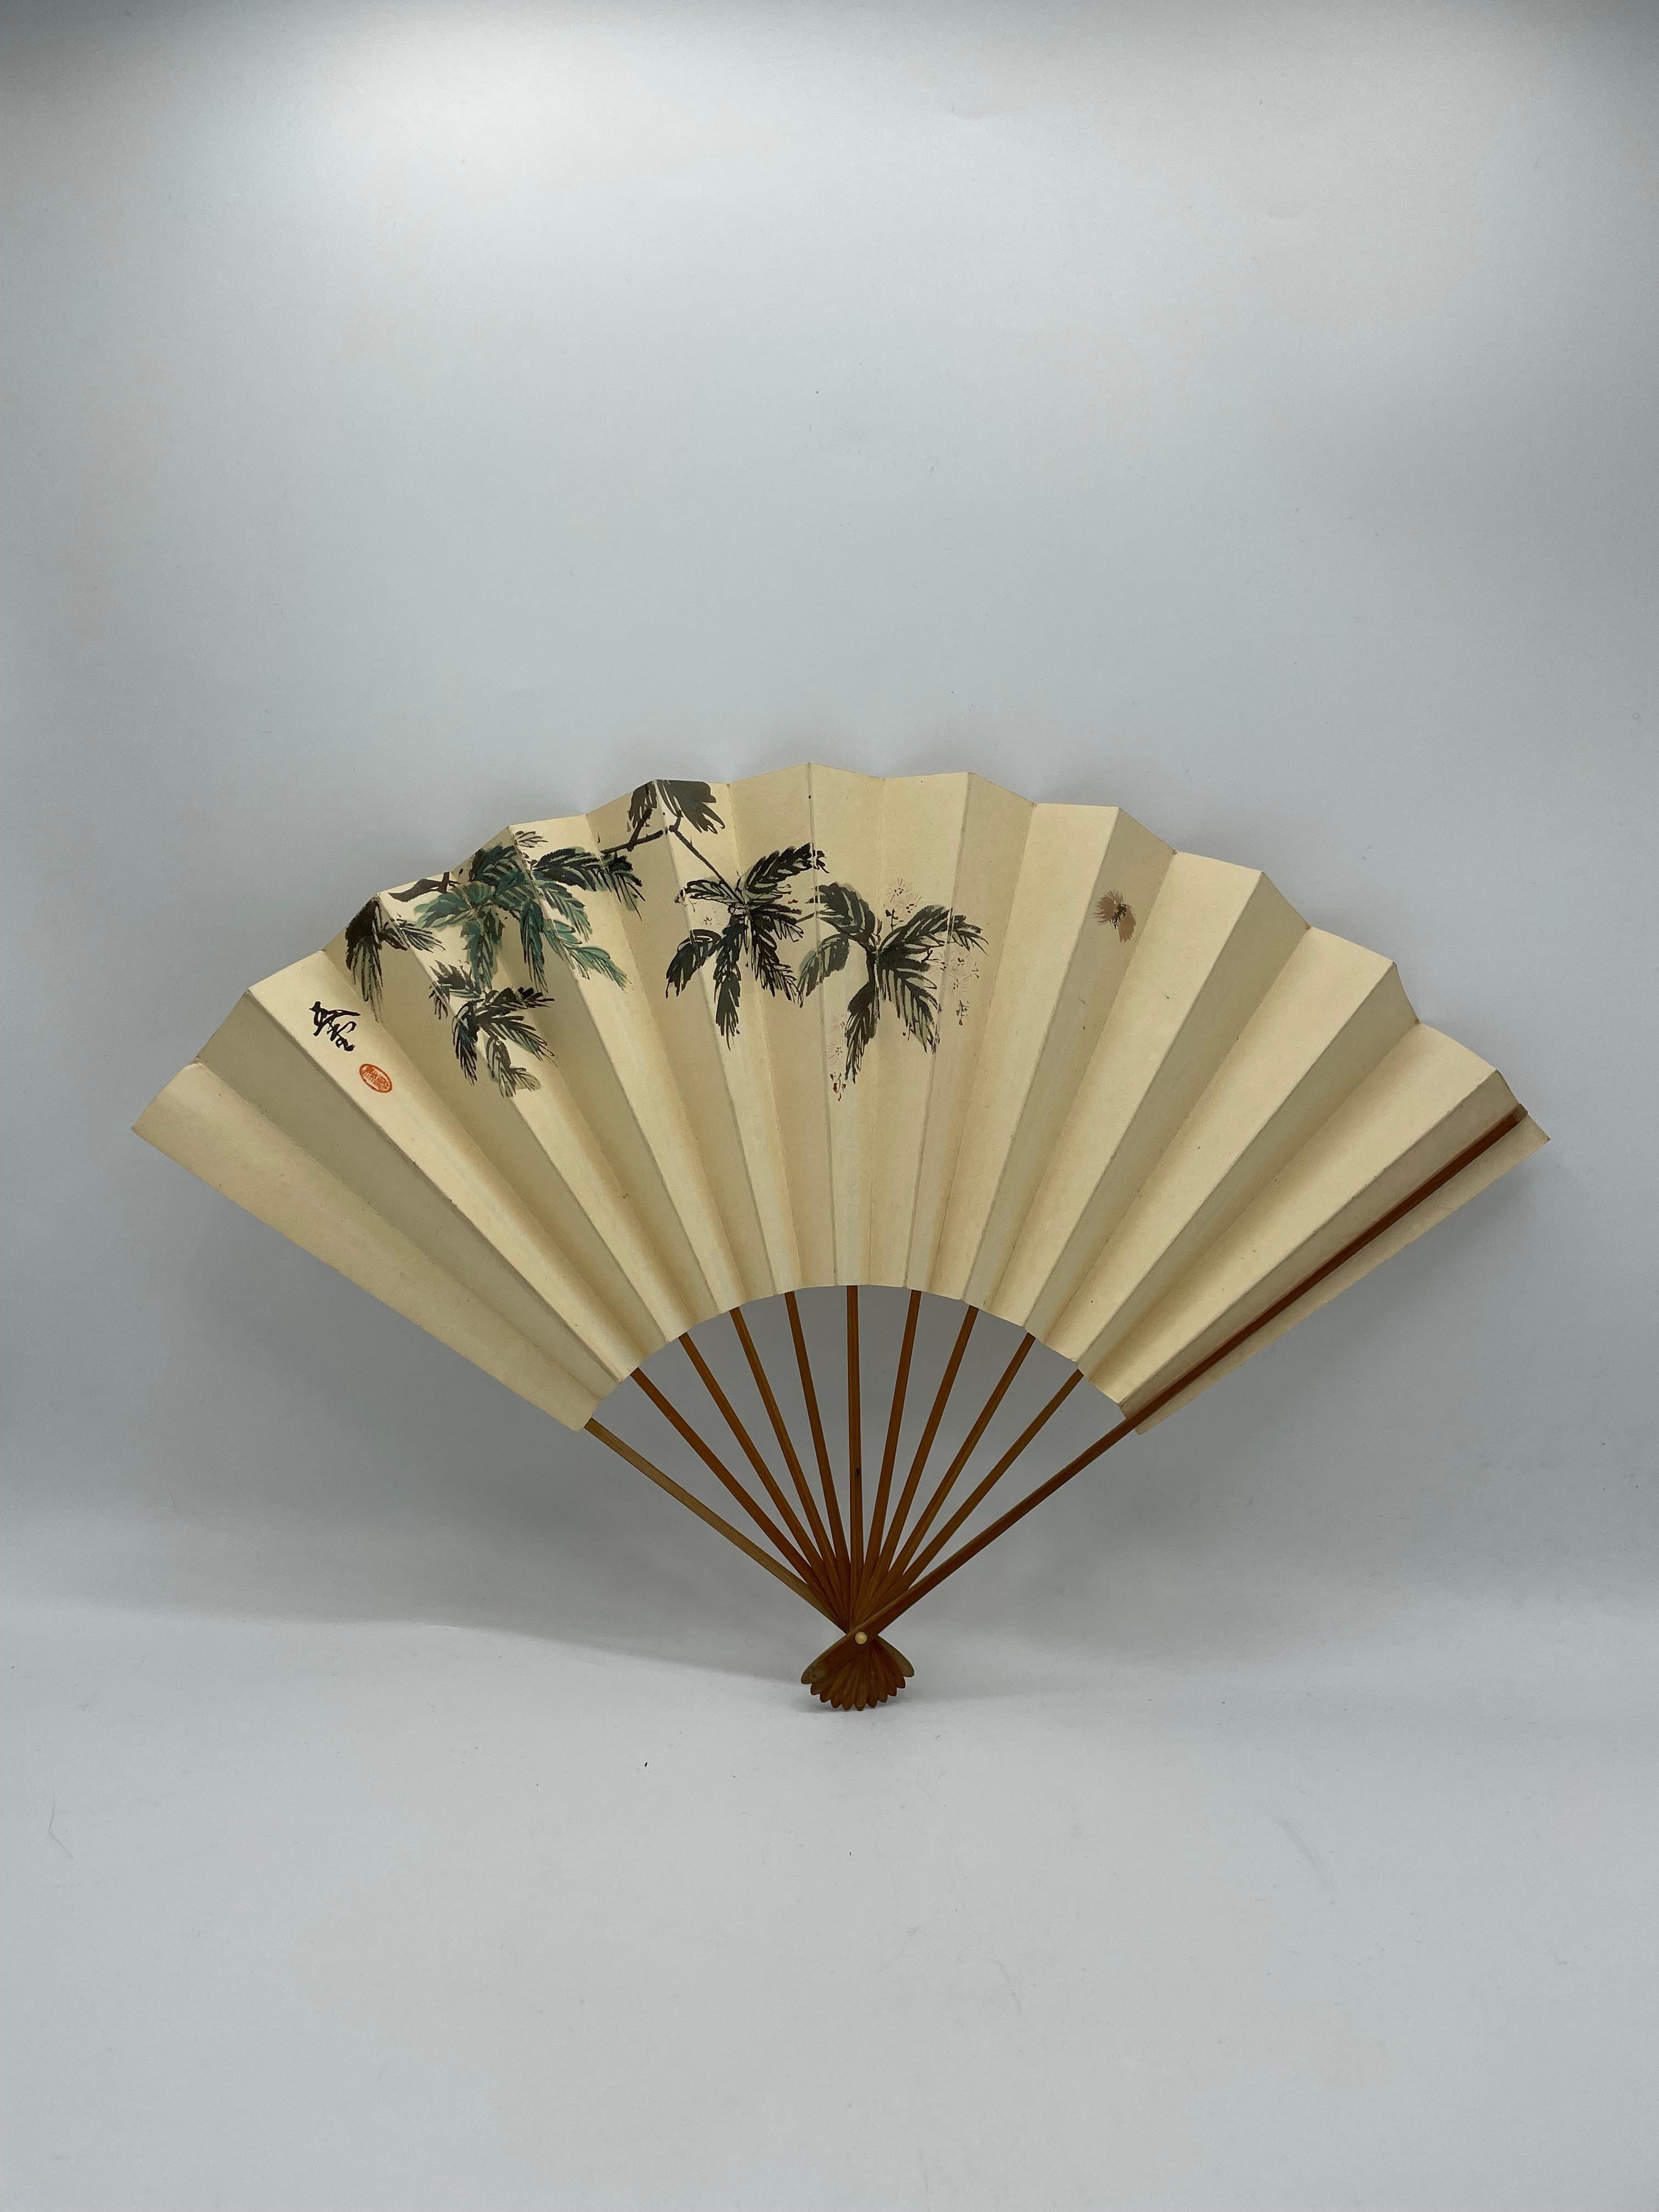 This is a fan which was made in Japan around 1980s in Showa era.
This is made with a paper and bamboos. This fan is printed.

Japanese fans are made of paper on a bamboo frame, usually with a design painted on them. In addition to folding fans